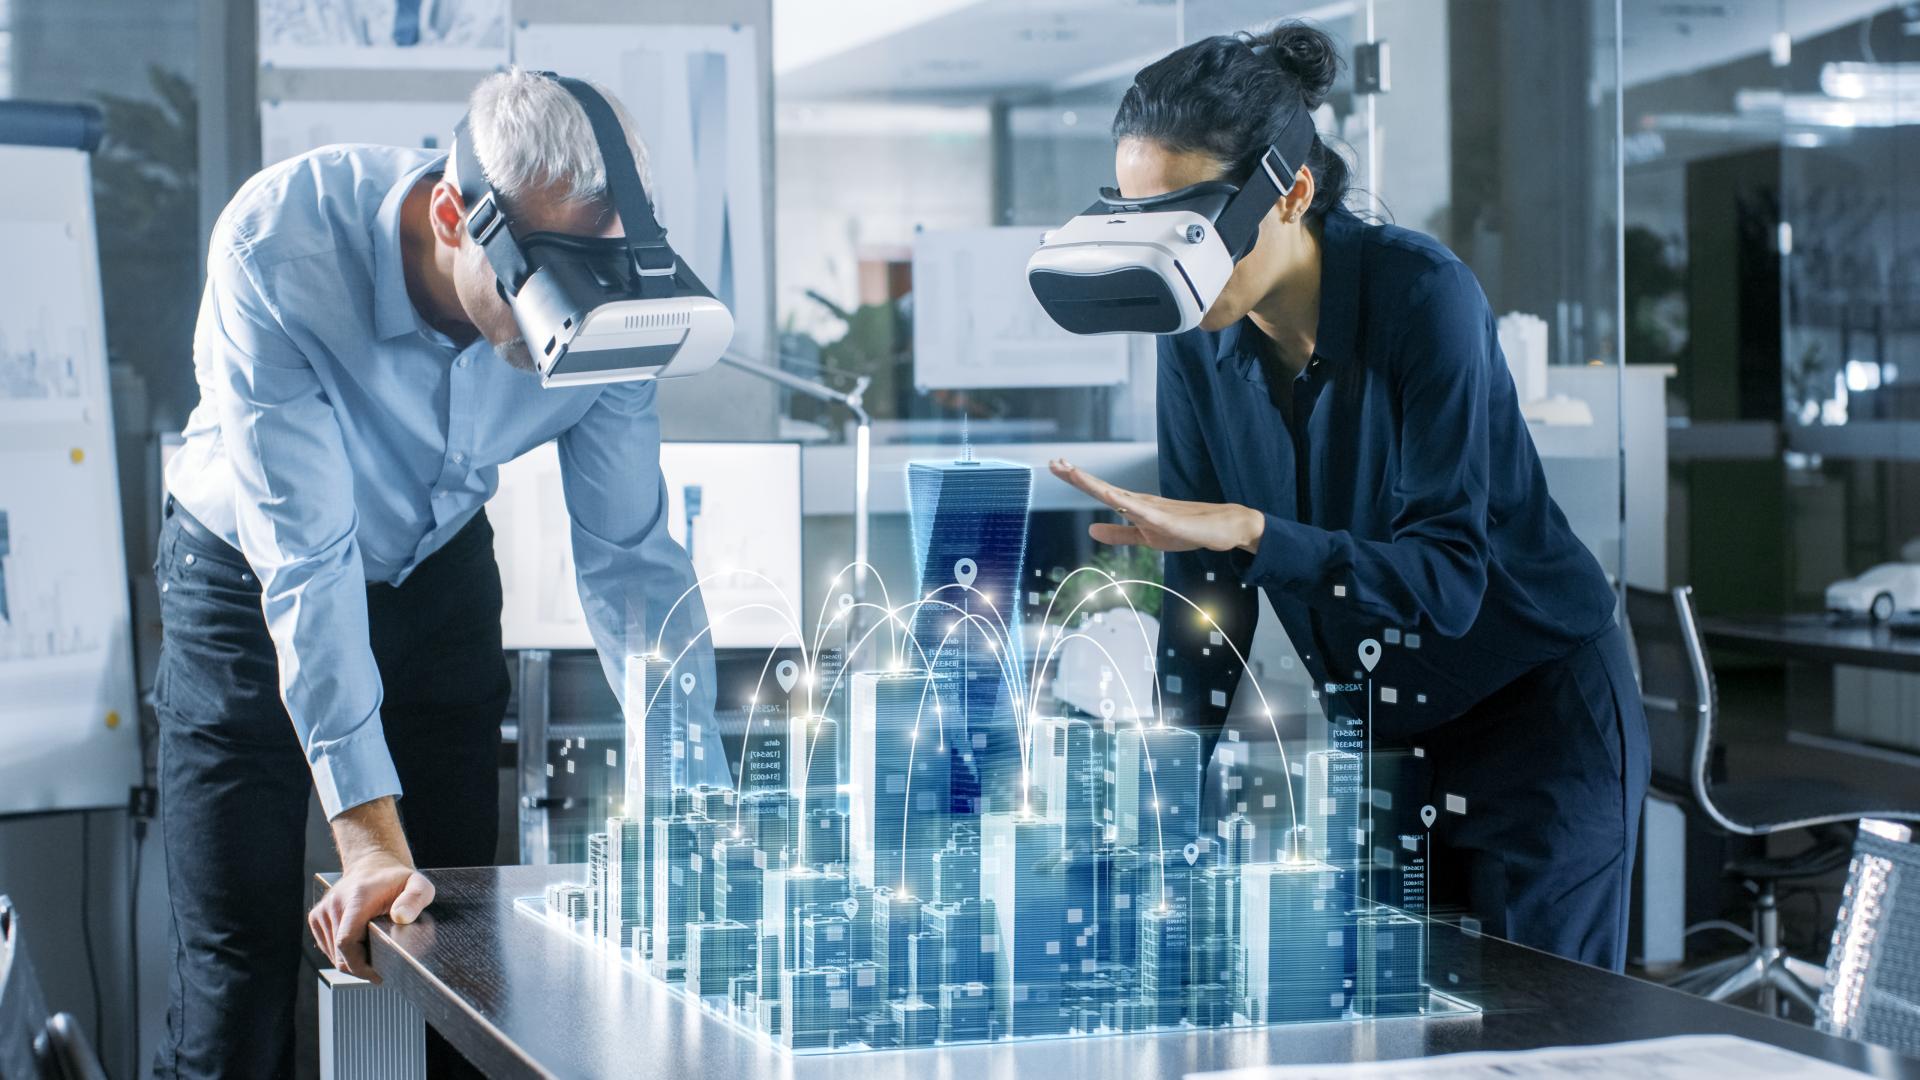 Architects using VR to study 3D city model